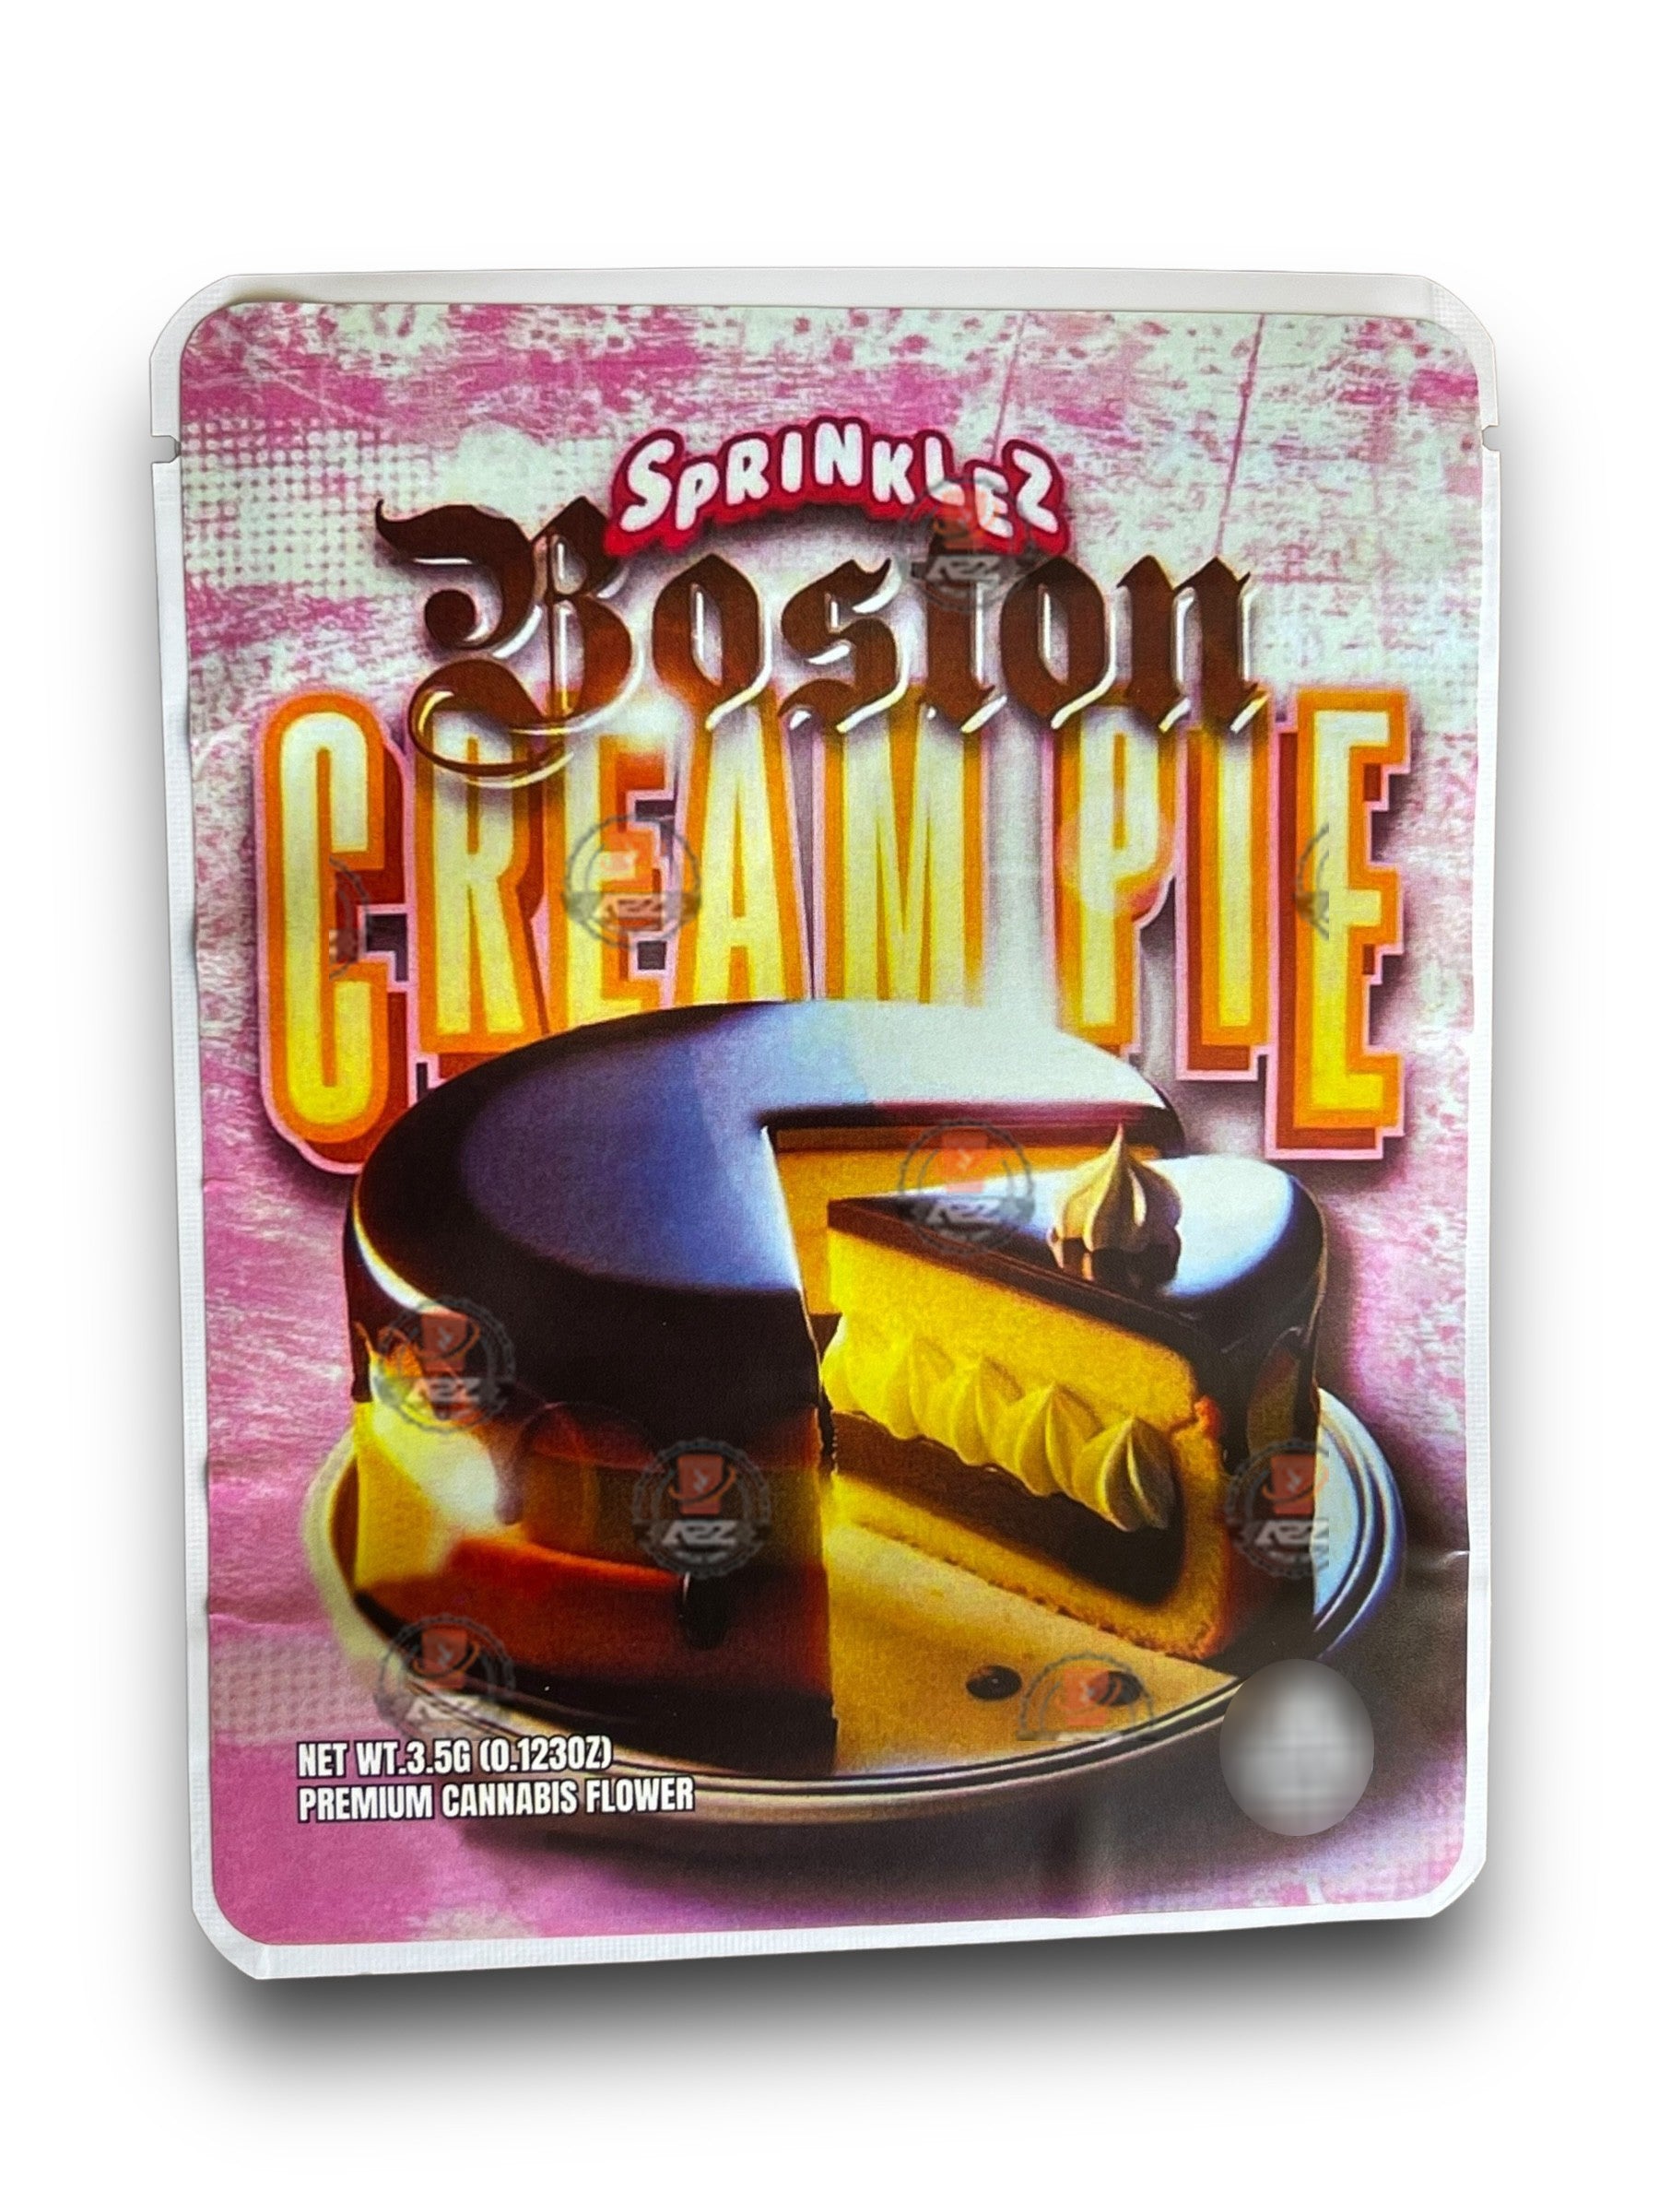 Boston Cream Pie 3.5G Mylar Bags -With stickers and label